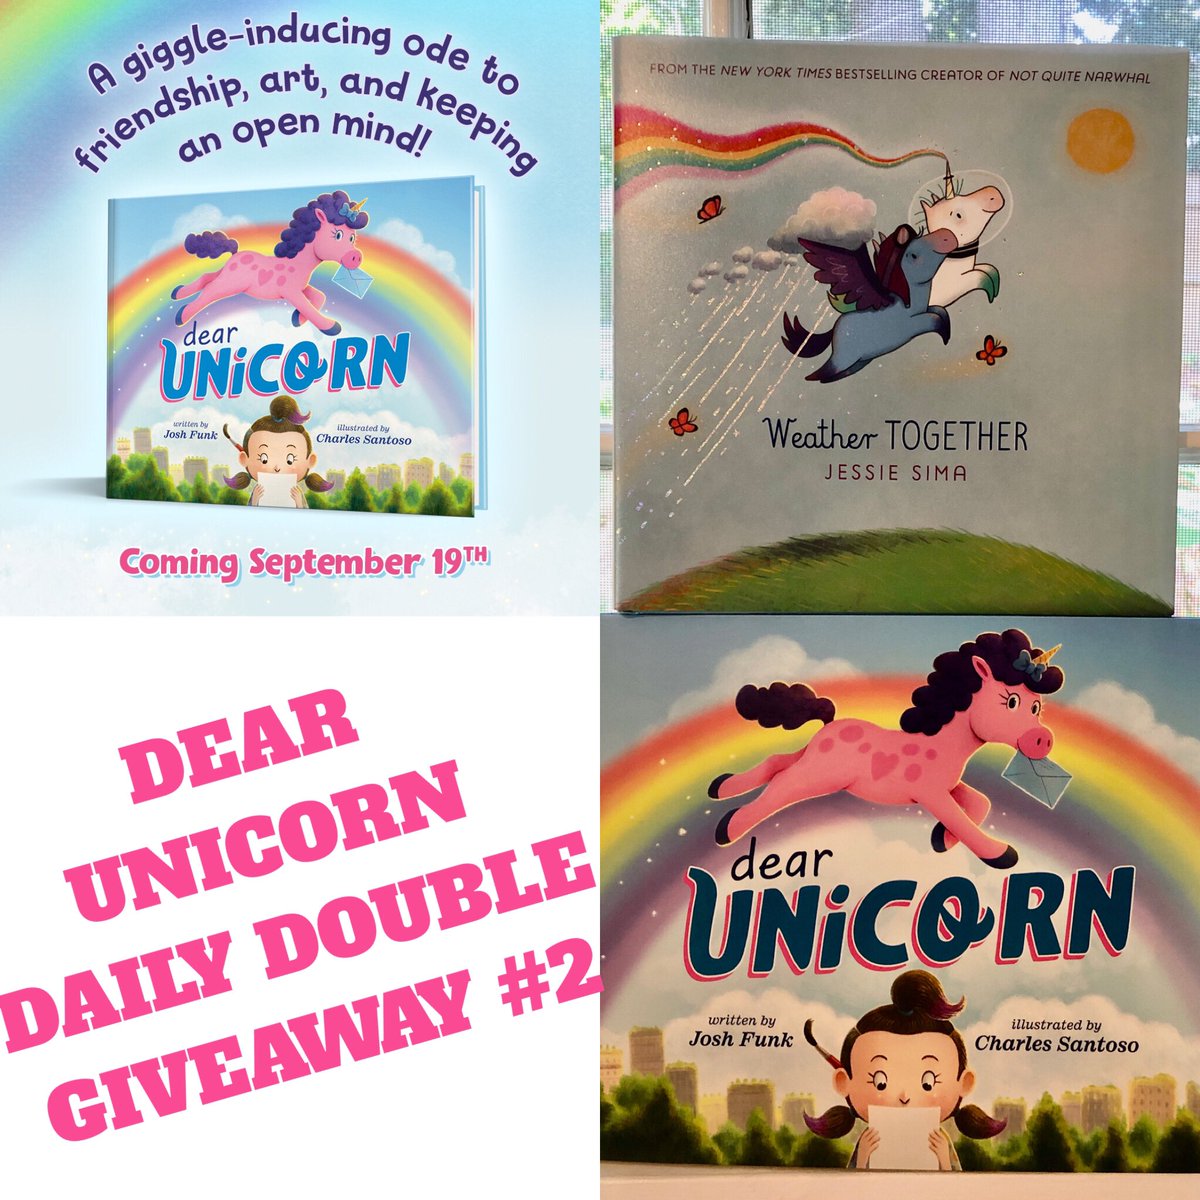 DEAR UNICORN Daily Double #Giveaway #2: WEATHER TOGETHER by Jessie Sima DEAR UNICORN written by me (Josh Funk) and Charles Santoso To enter: ✅ FOLLOW ❤️ LIKE 🔃 REPOST/QUOTEPOST BONUS: 👉 REPLY & TAG A FRIEND Winner announced on 9/24.